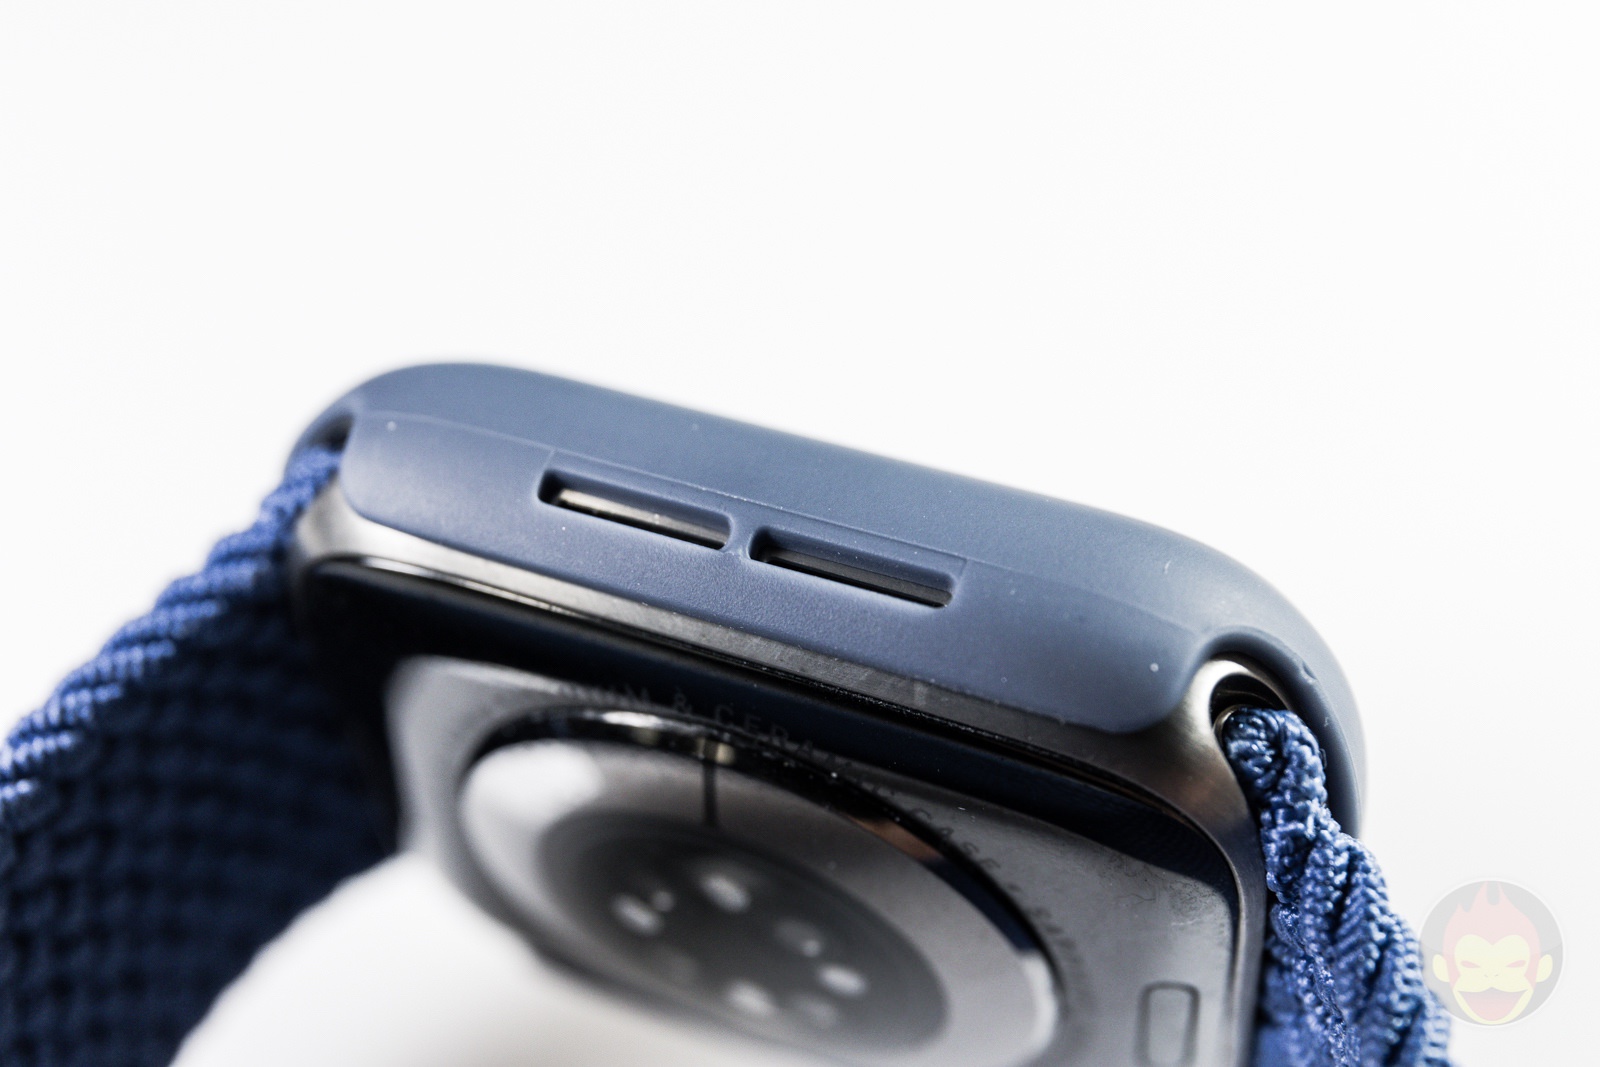 Reflying Apple Watch Case Review 08